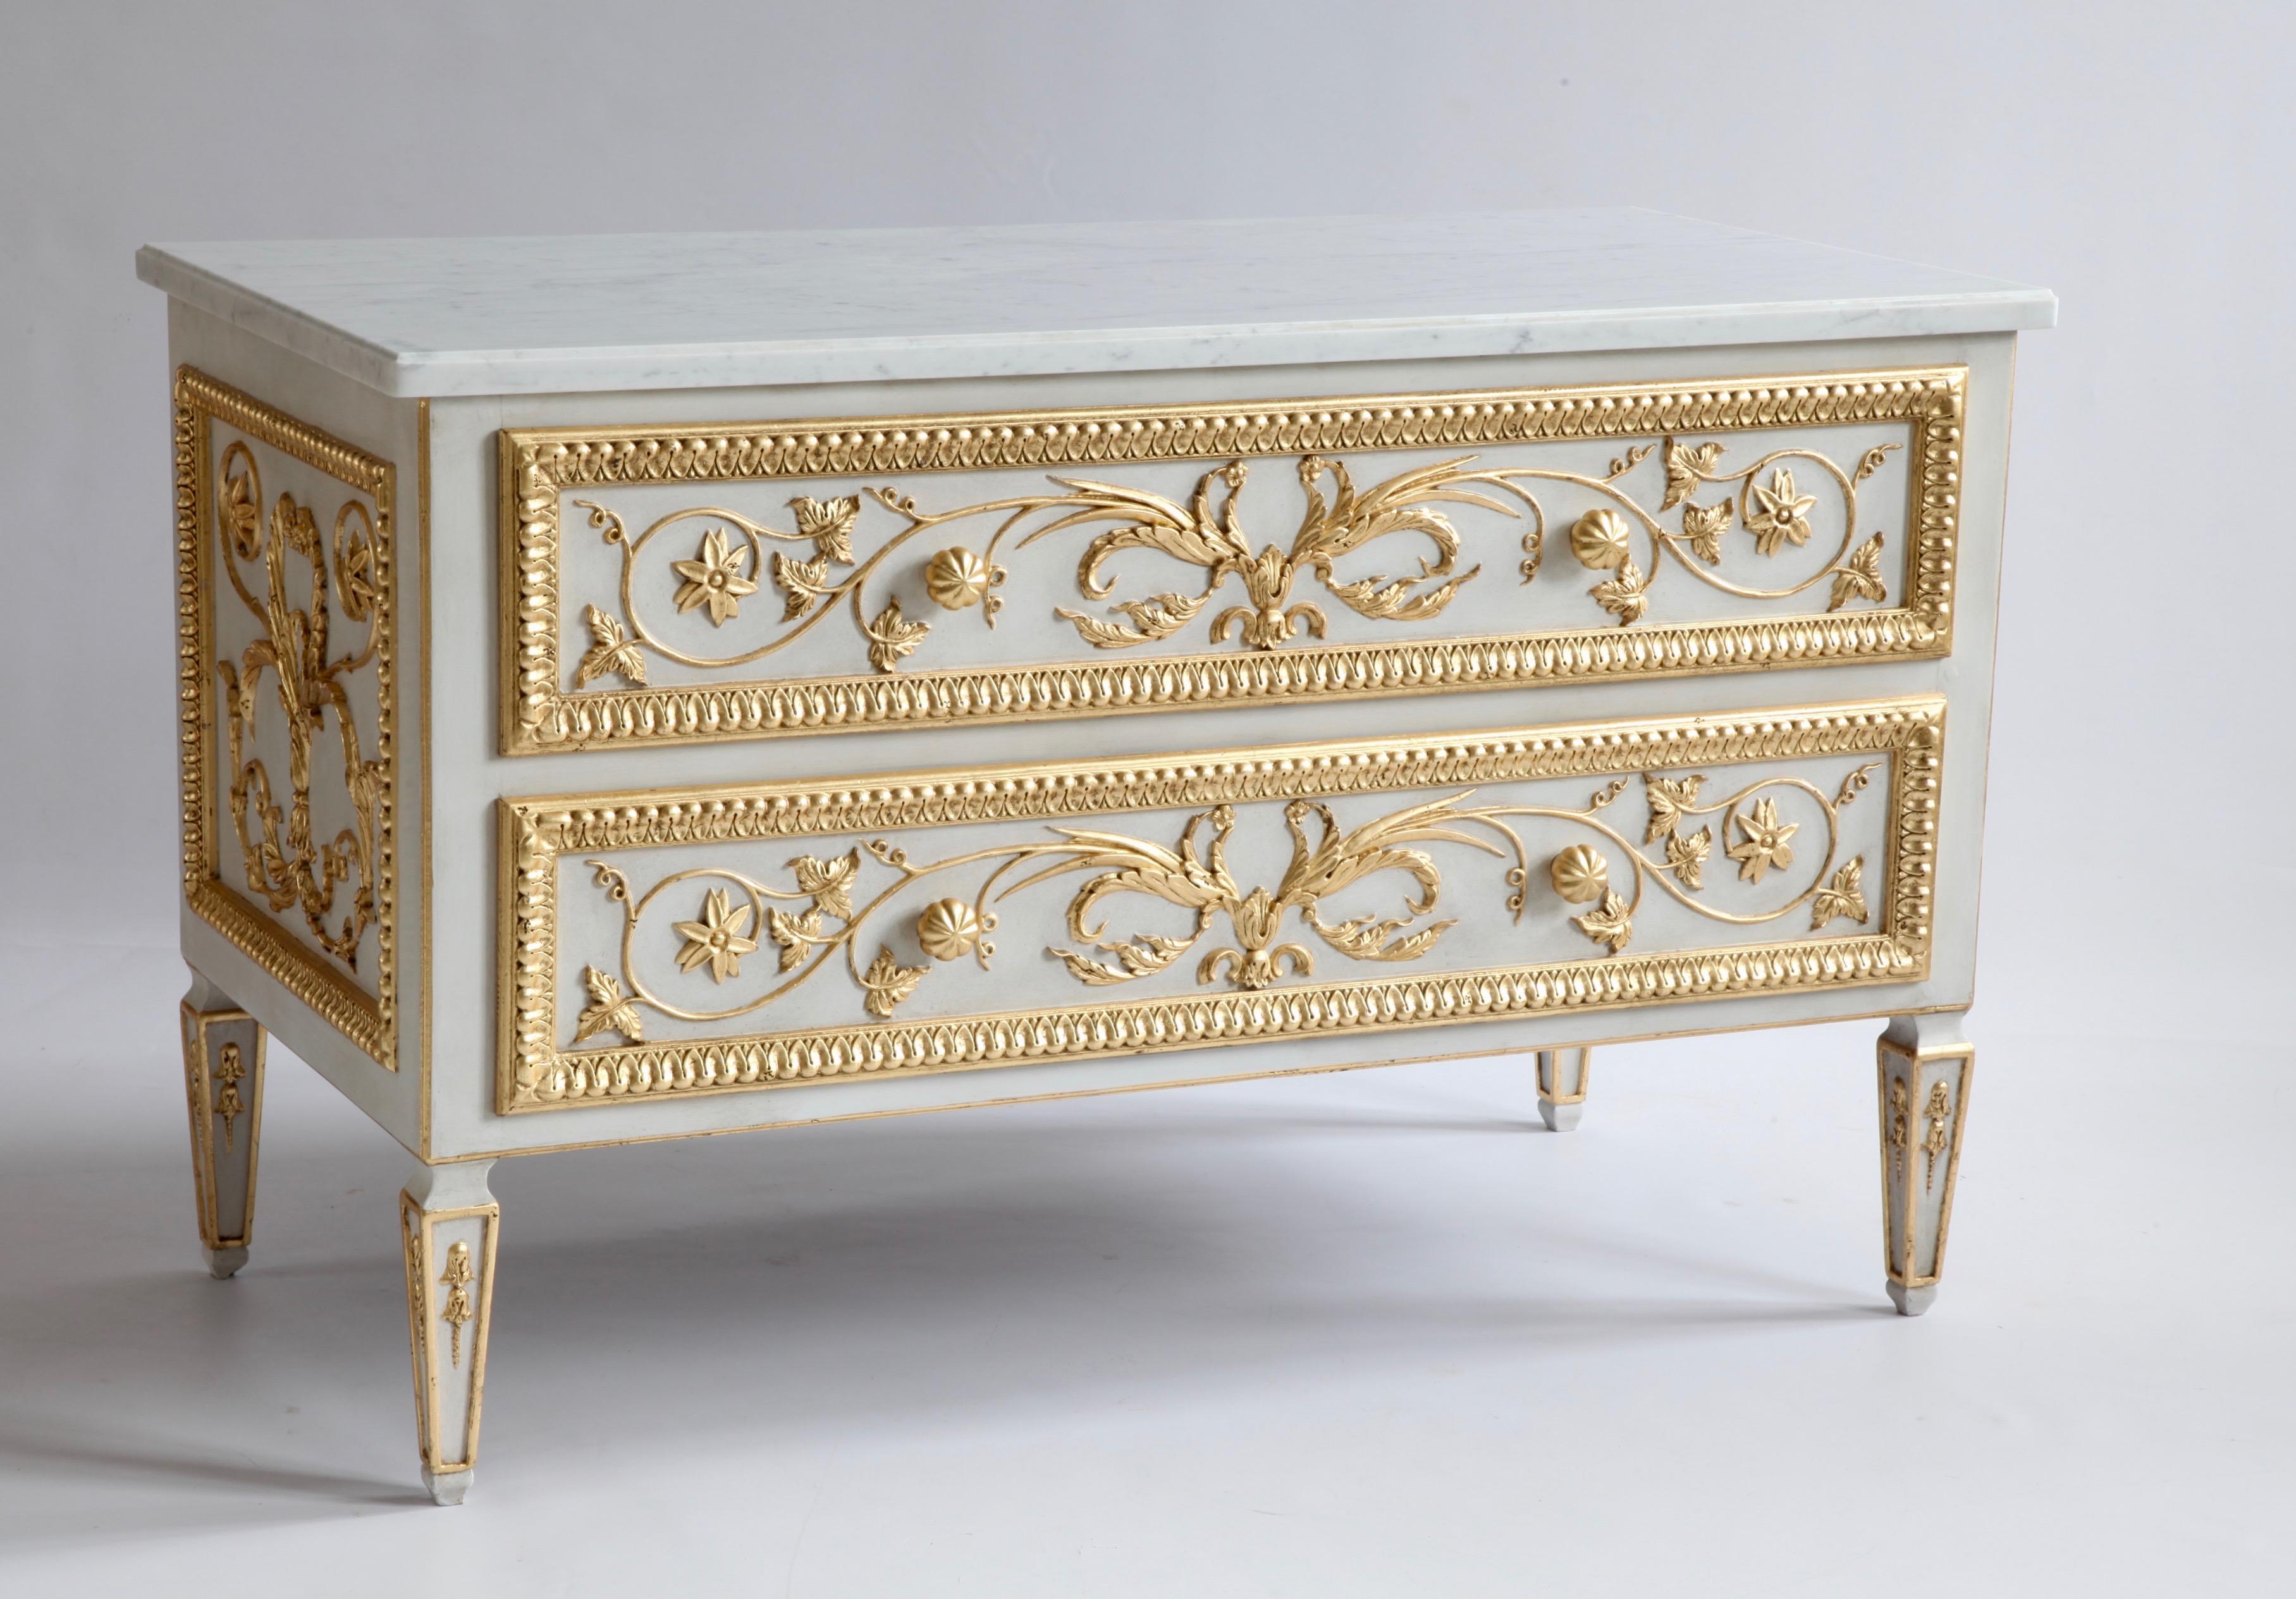 Louis XVI style commode / chest of drawers.
Hand carved in solid wood, painted in lime white with gold highlights.
With a 30mm honed Carrara marble top.
Very fine carving all around.